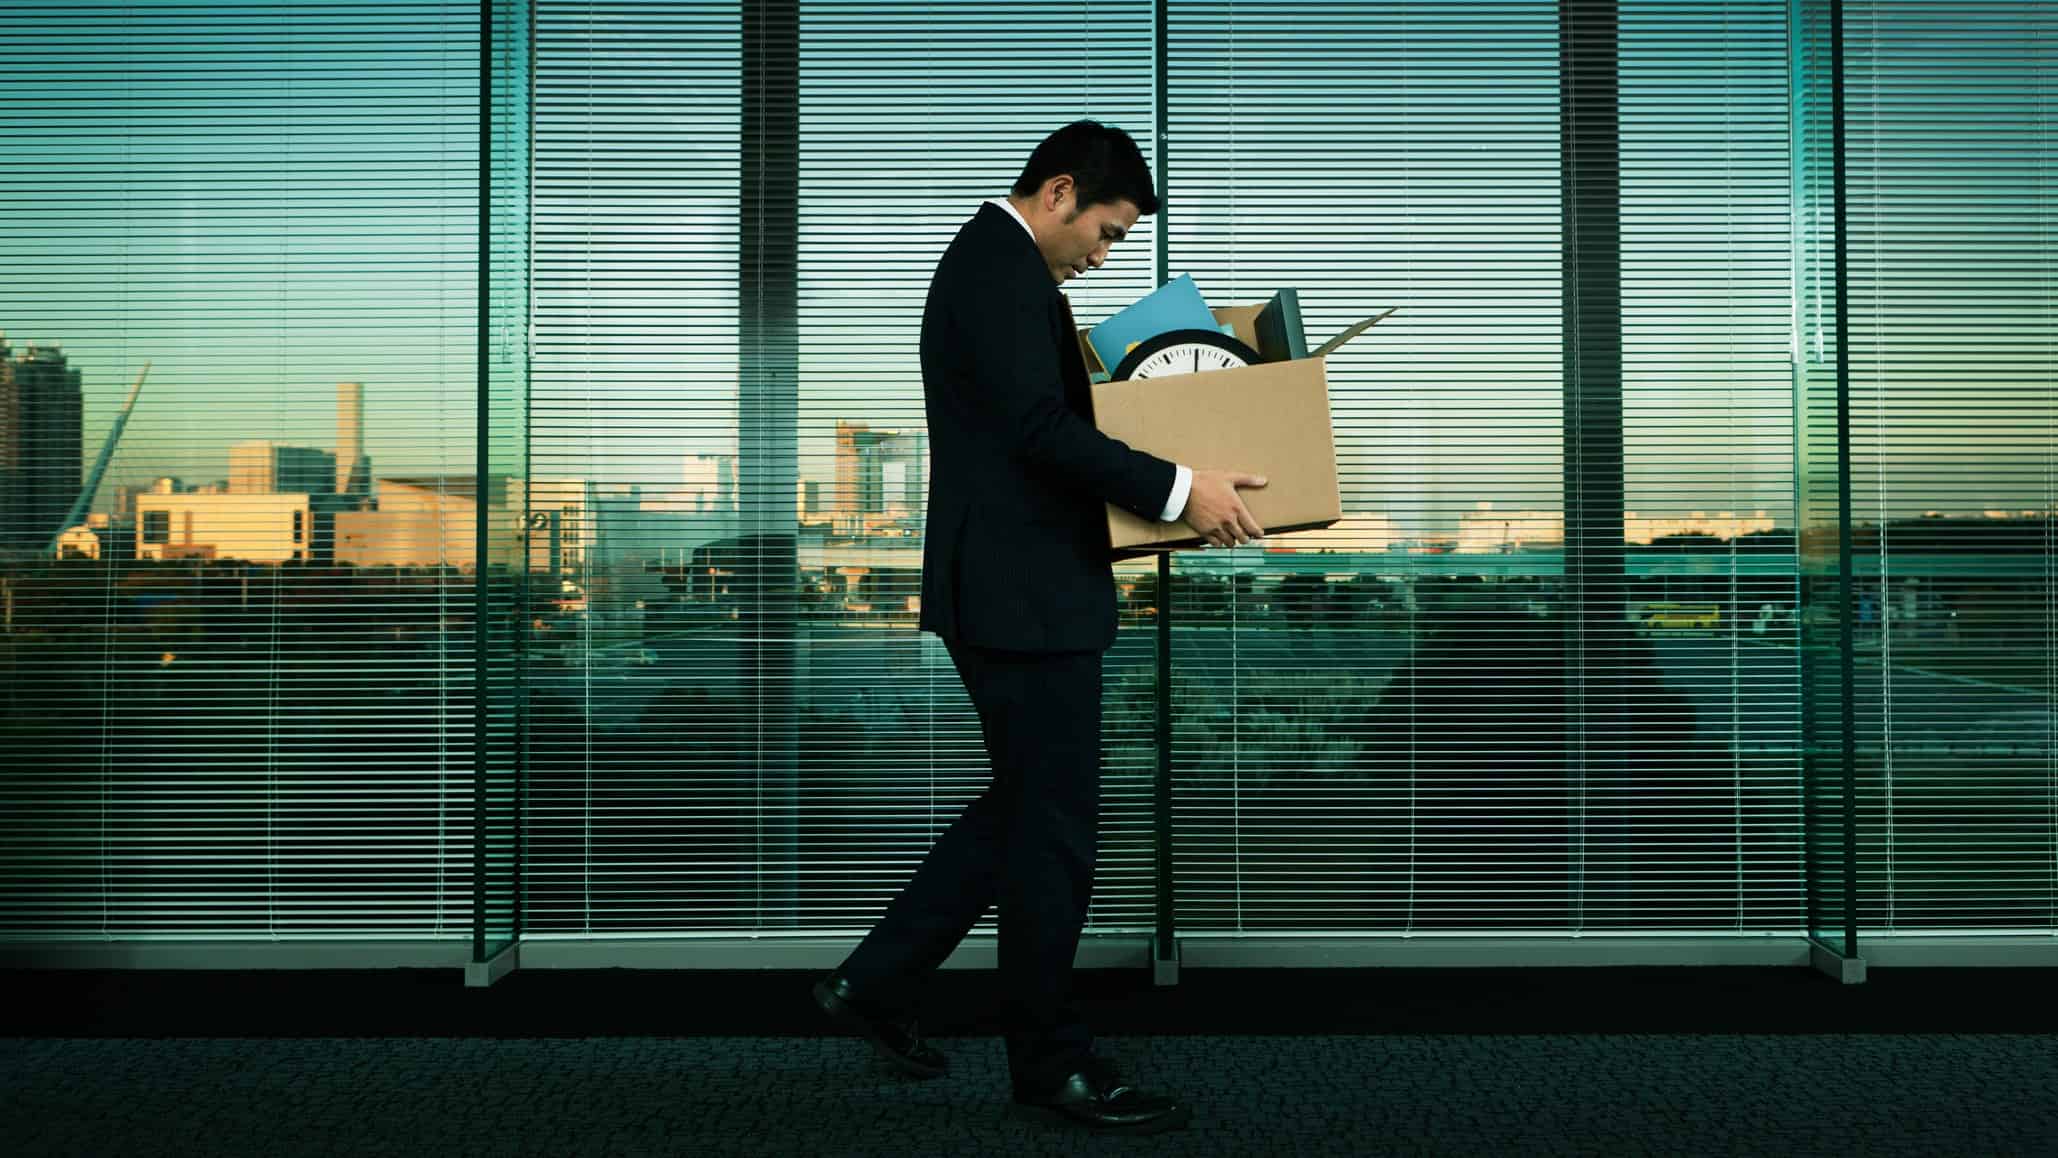 A man walks dejectedly with his belongings in a cardboard box against a background of office-style venetian blinds as though he has been giving his marching orders from his place of employment.